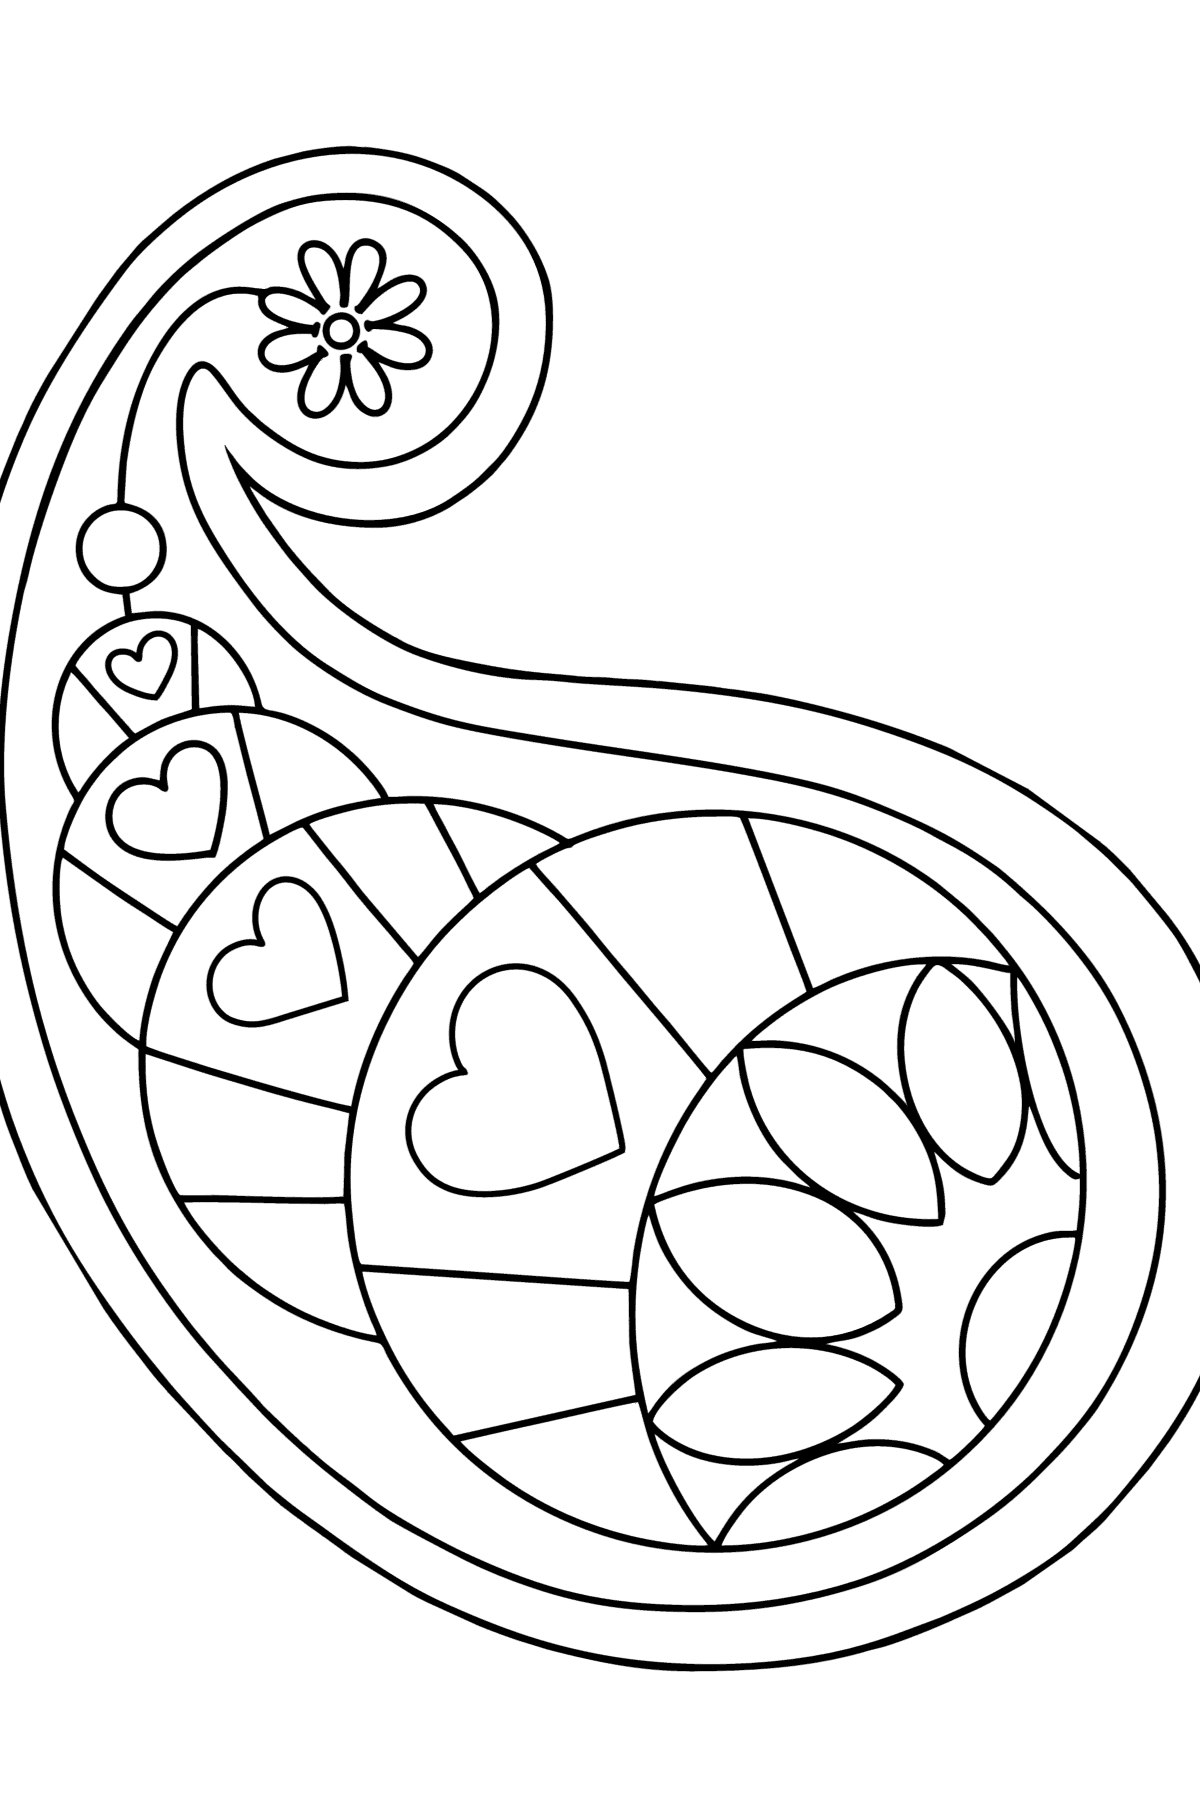 Paisley design coloring page - Coloring Pages for Kids